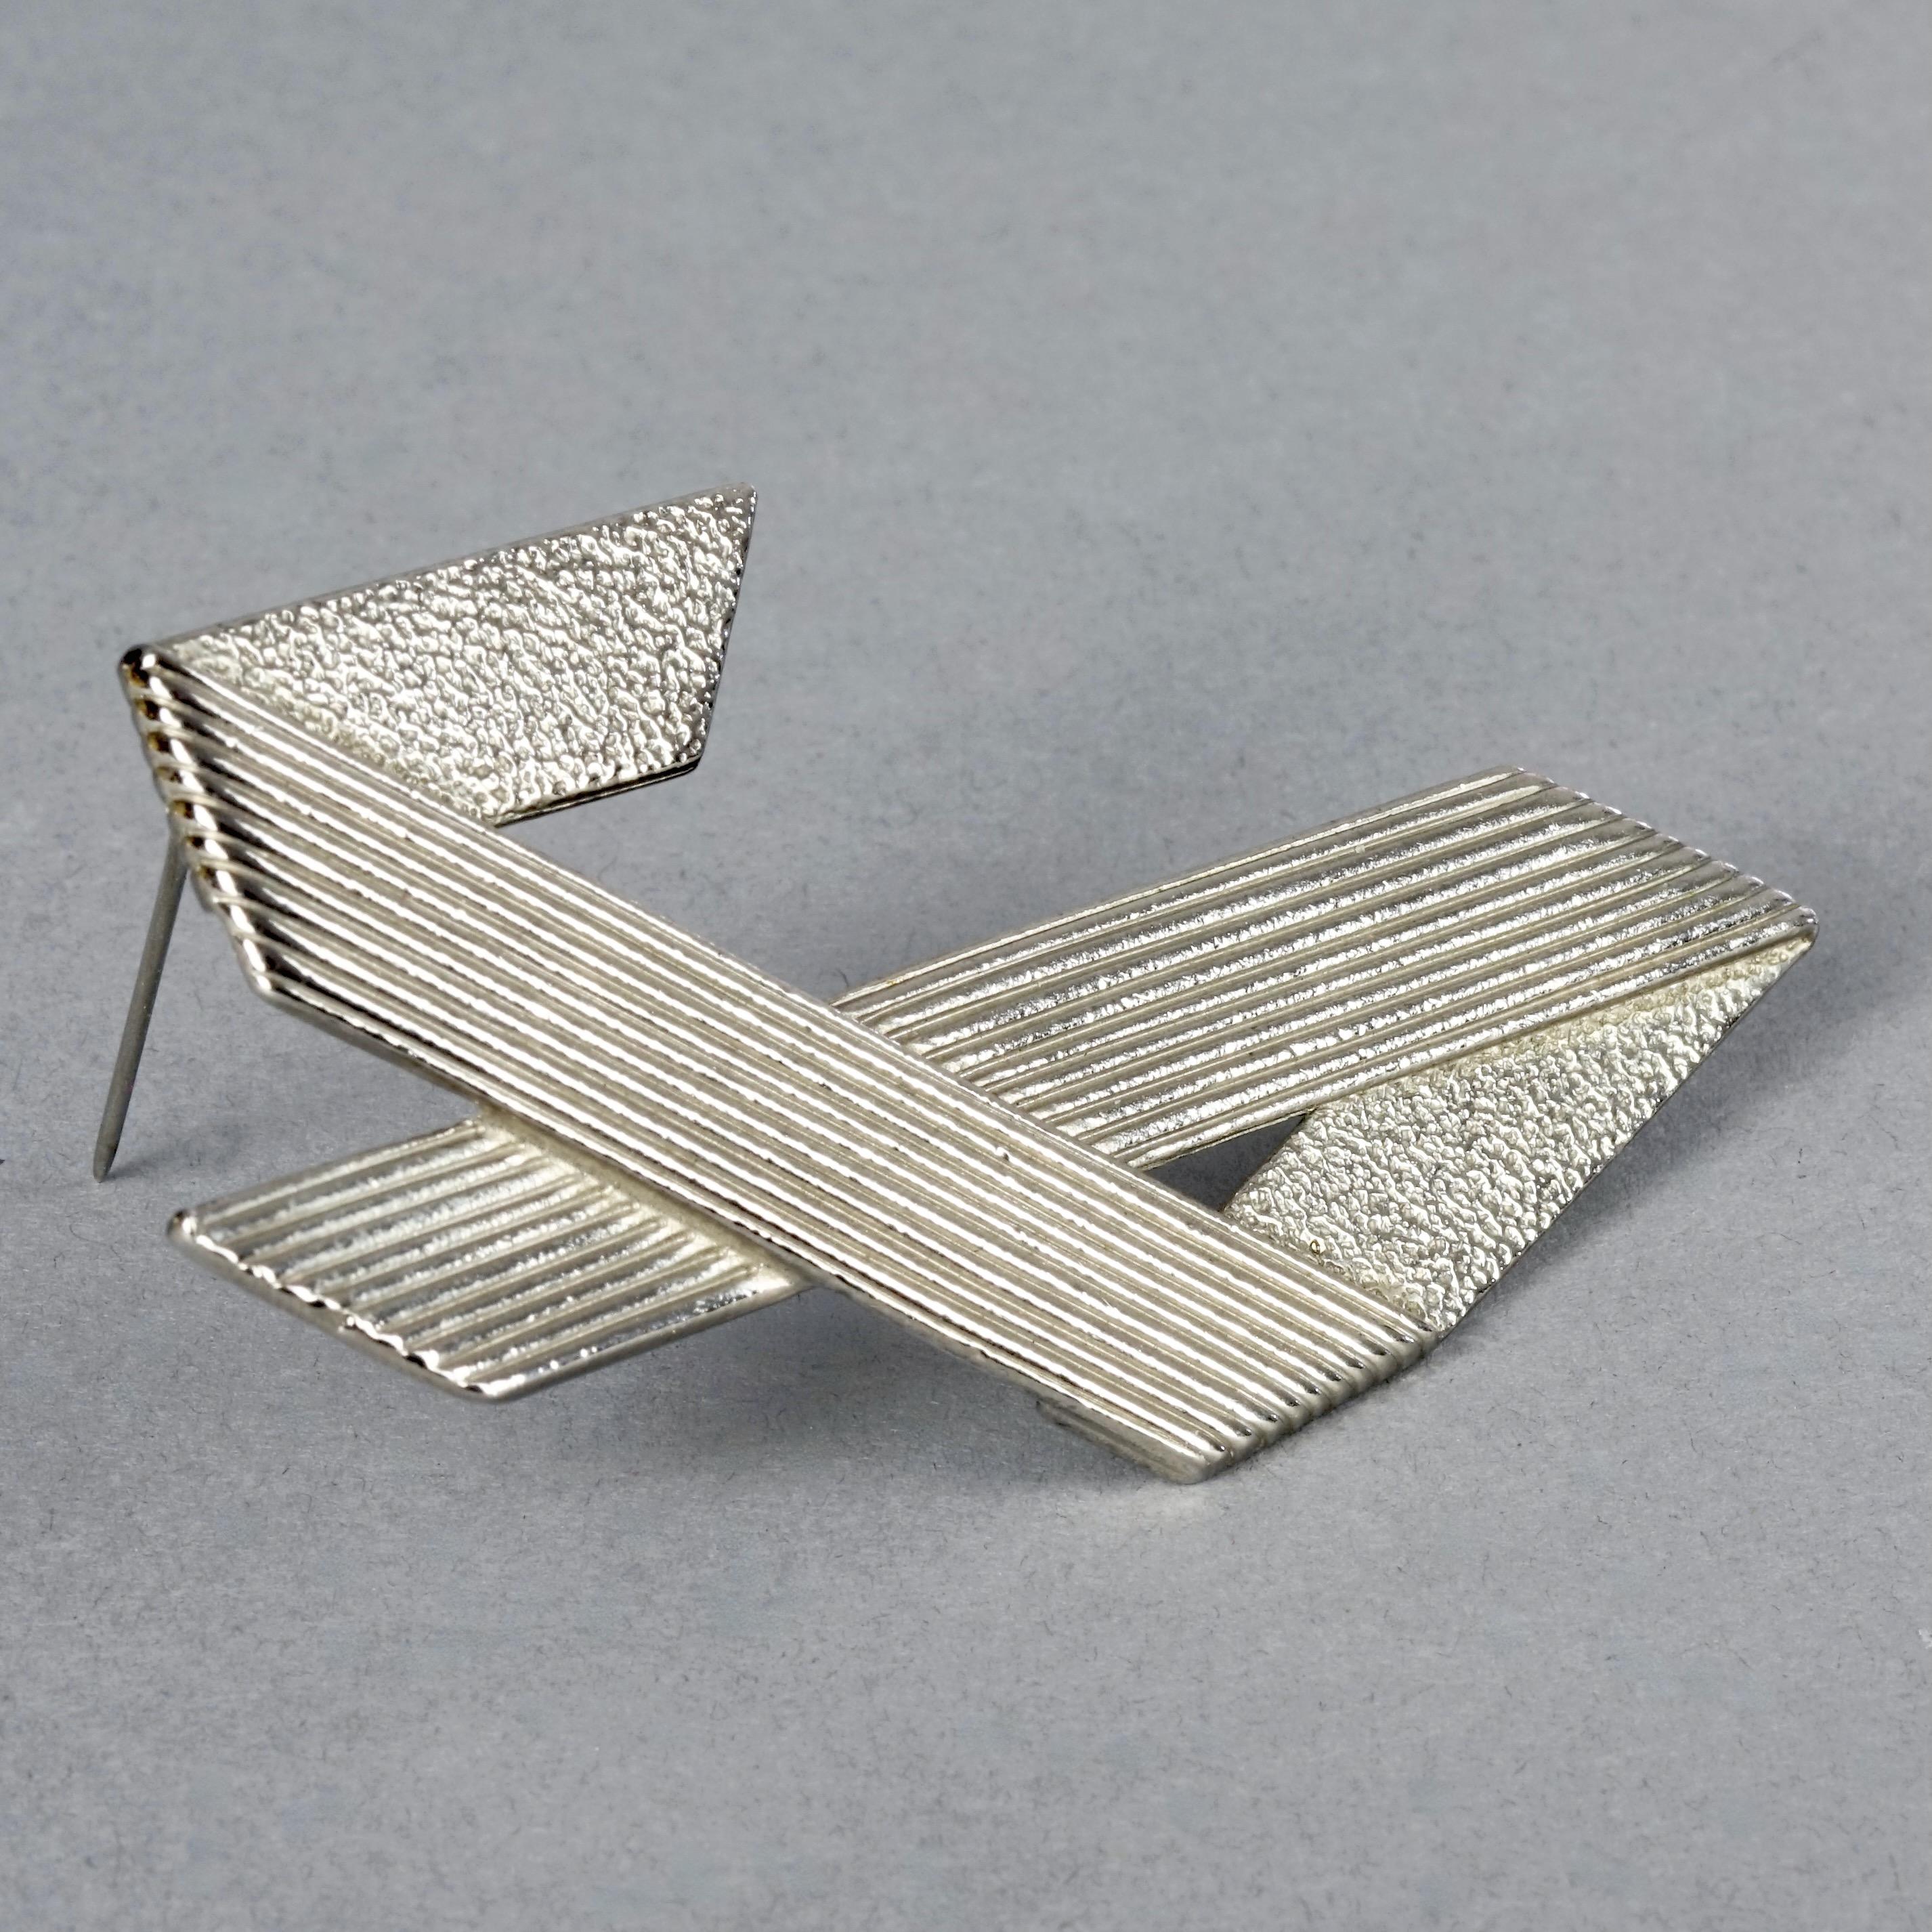 Vintage PACO RABANNE Abstract Silver Brooch In Excellent Condition For Sale In Kingersheim, Alsace